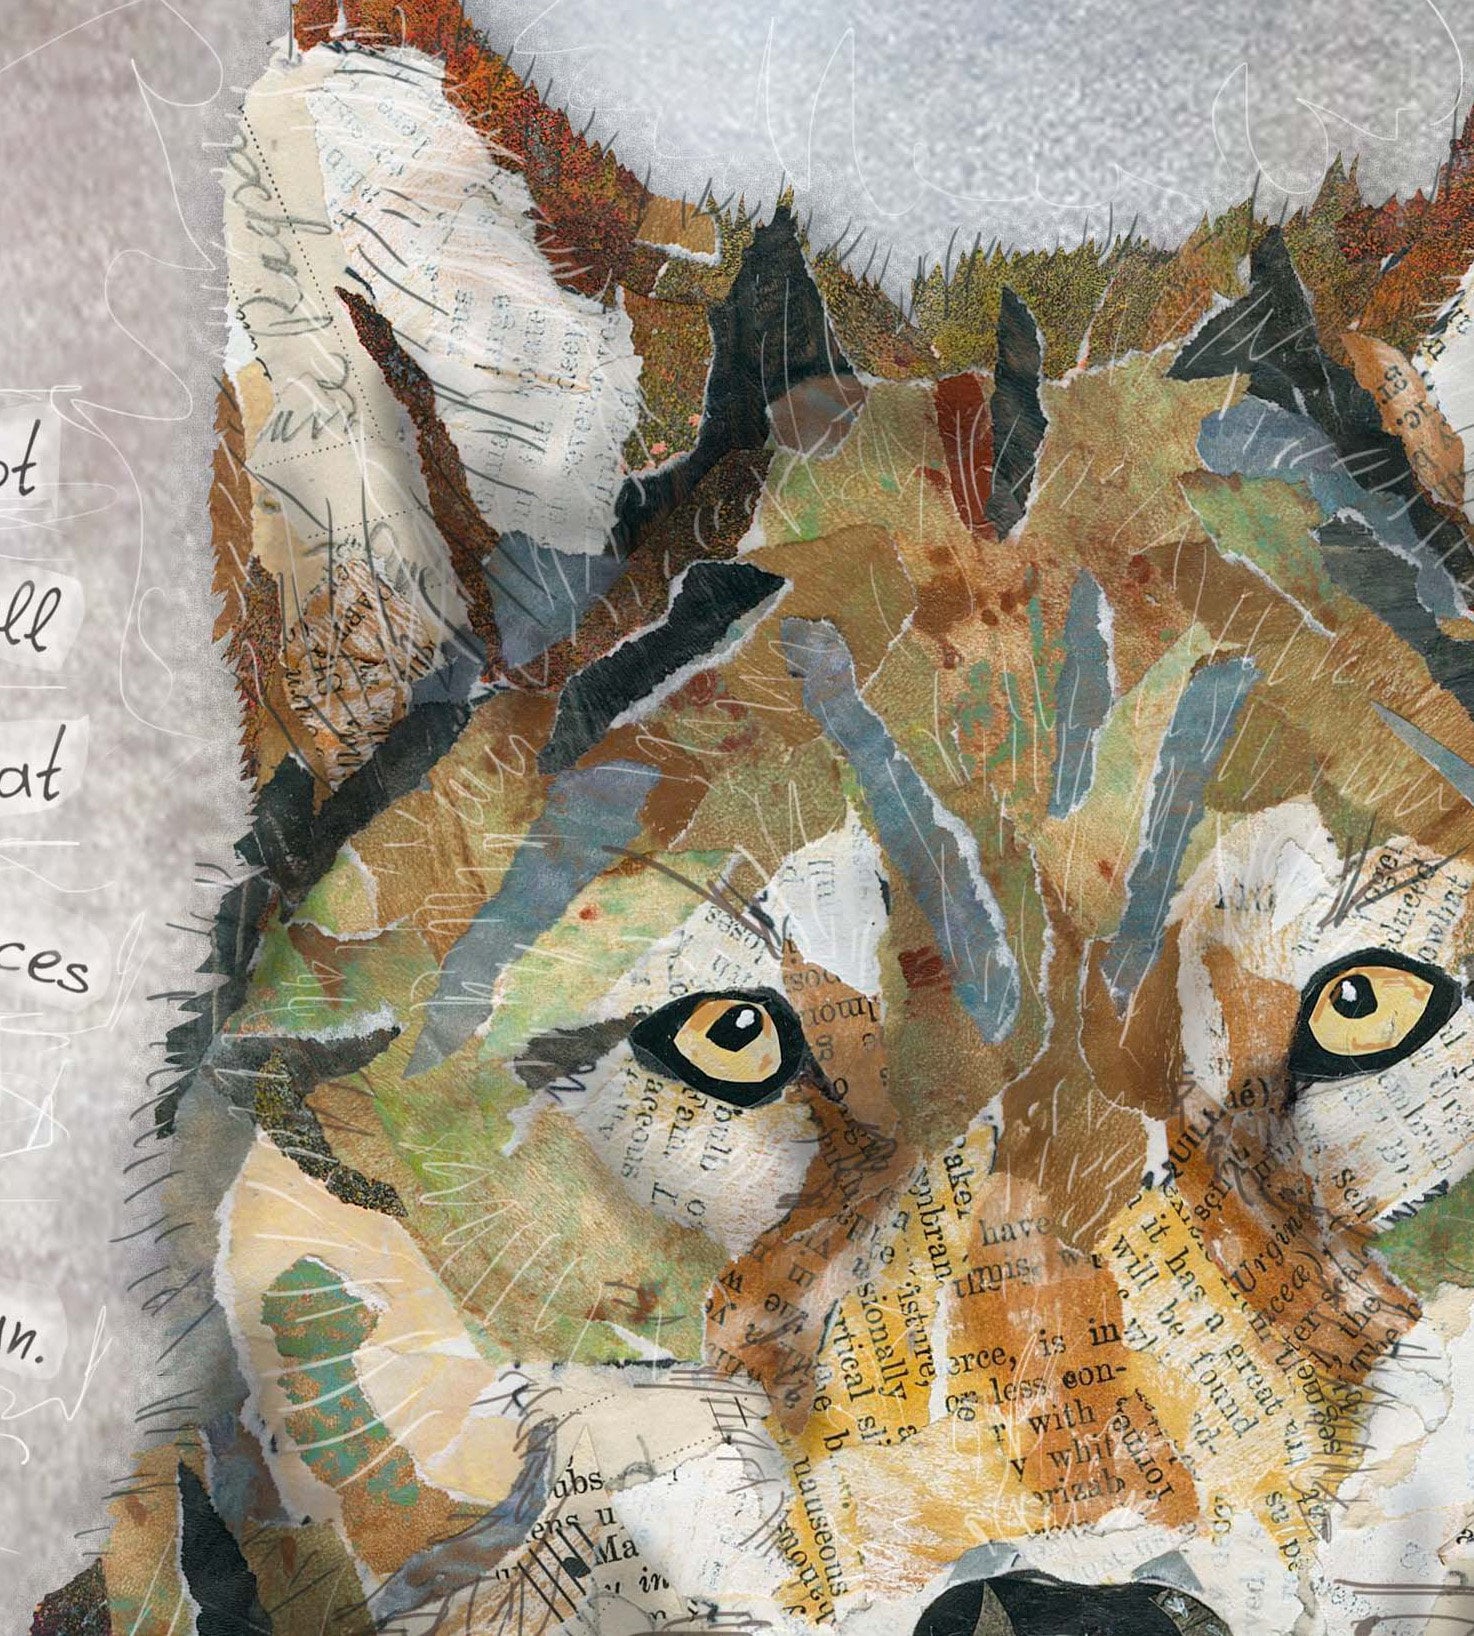 Greeting Card of mixed media collage of a wolf with inspirational quote saying "Not all great voices are human" - Blank Inside